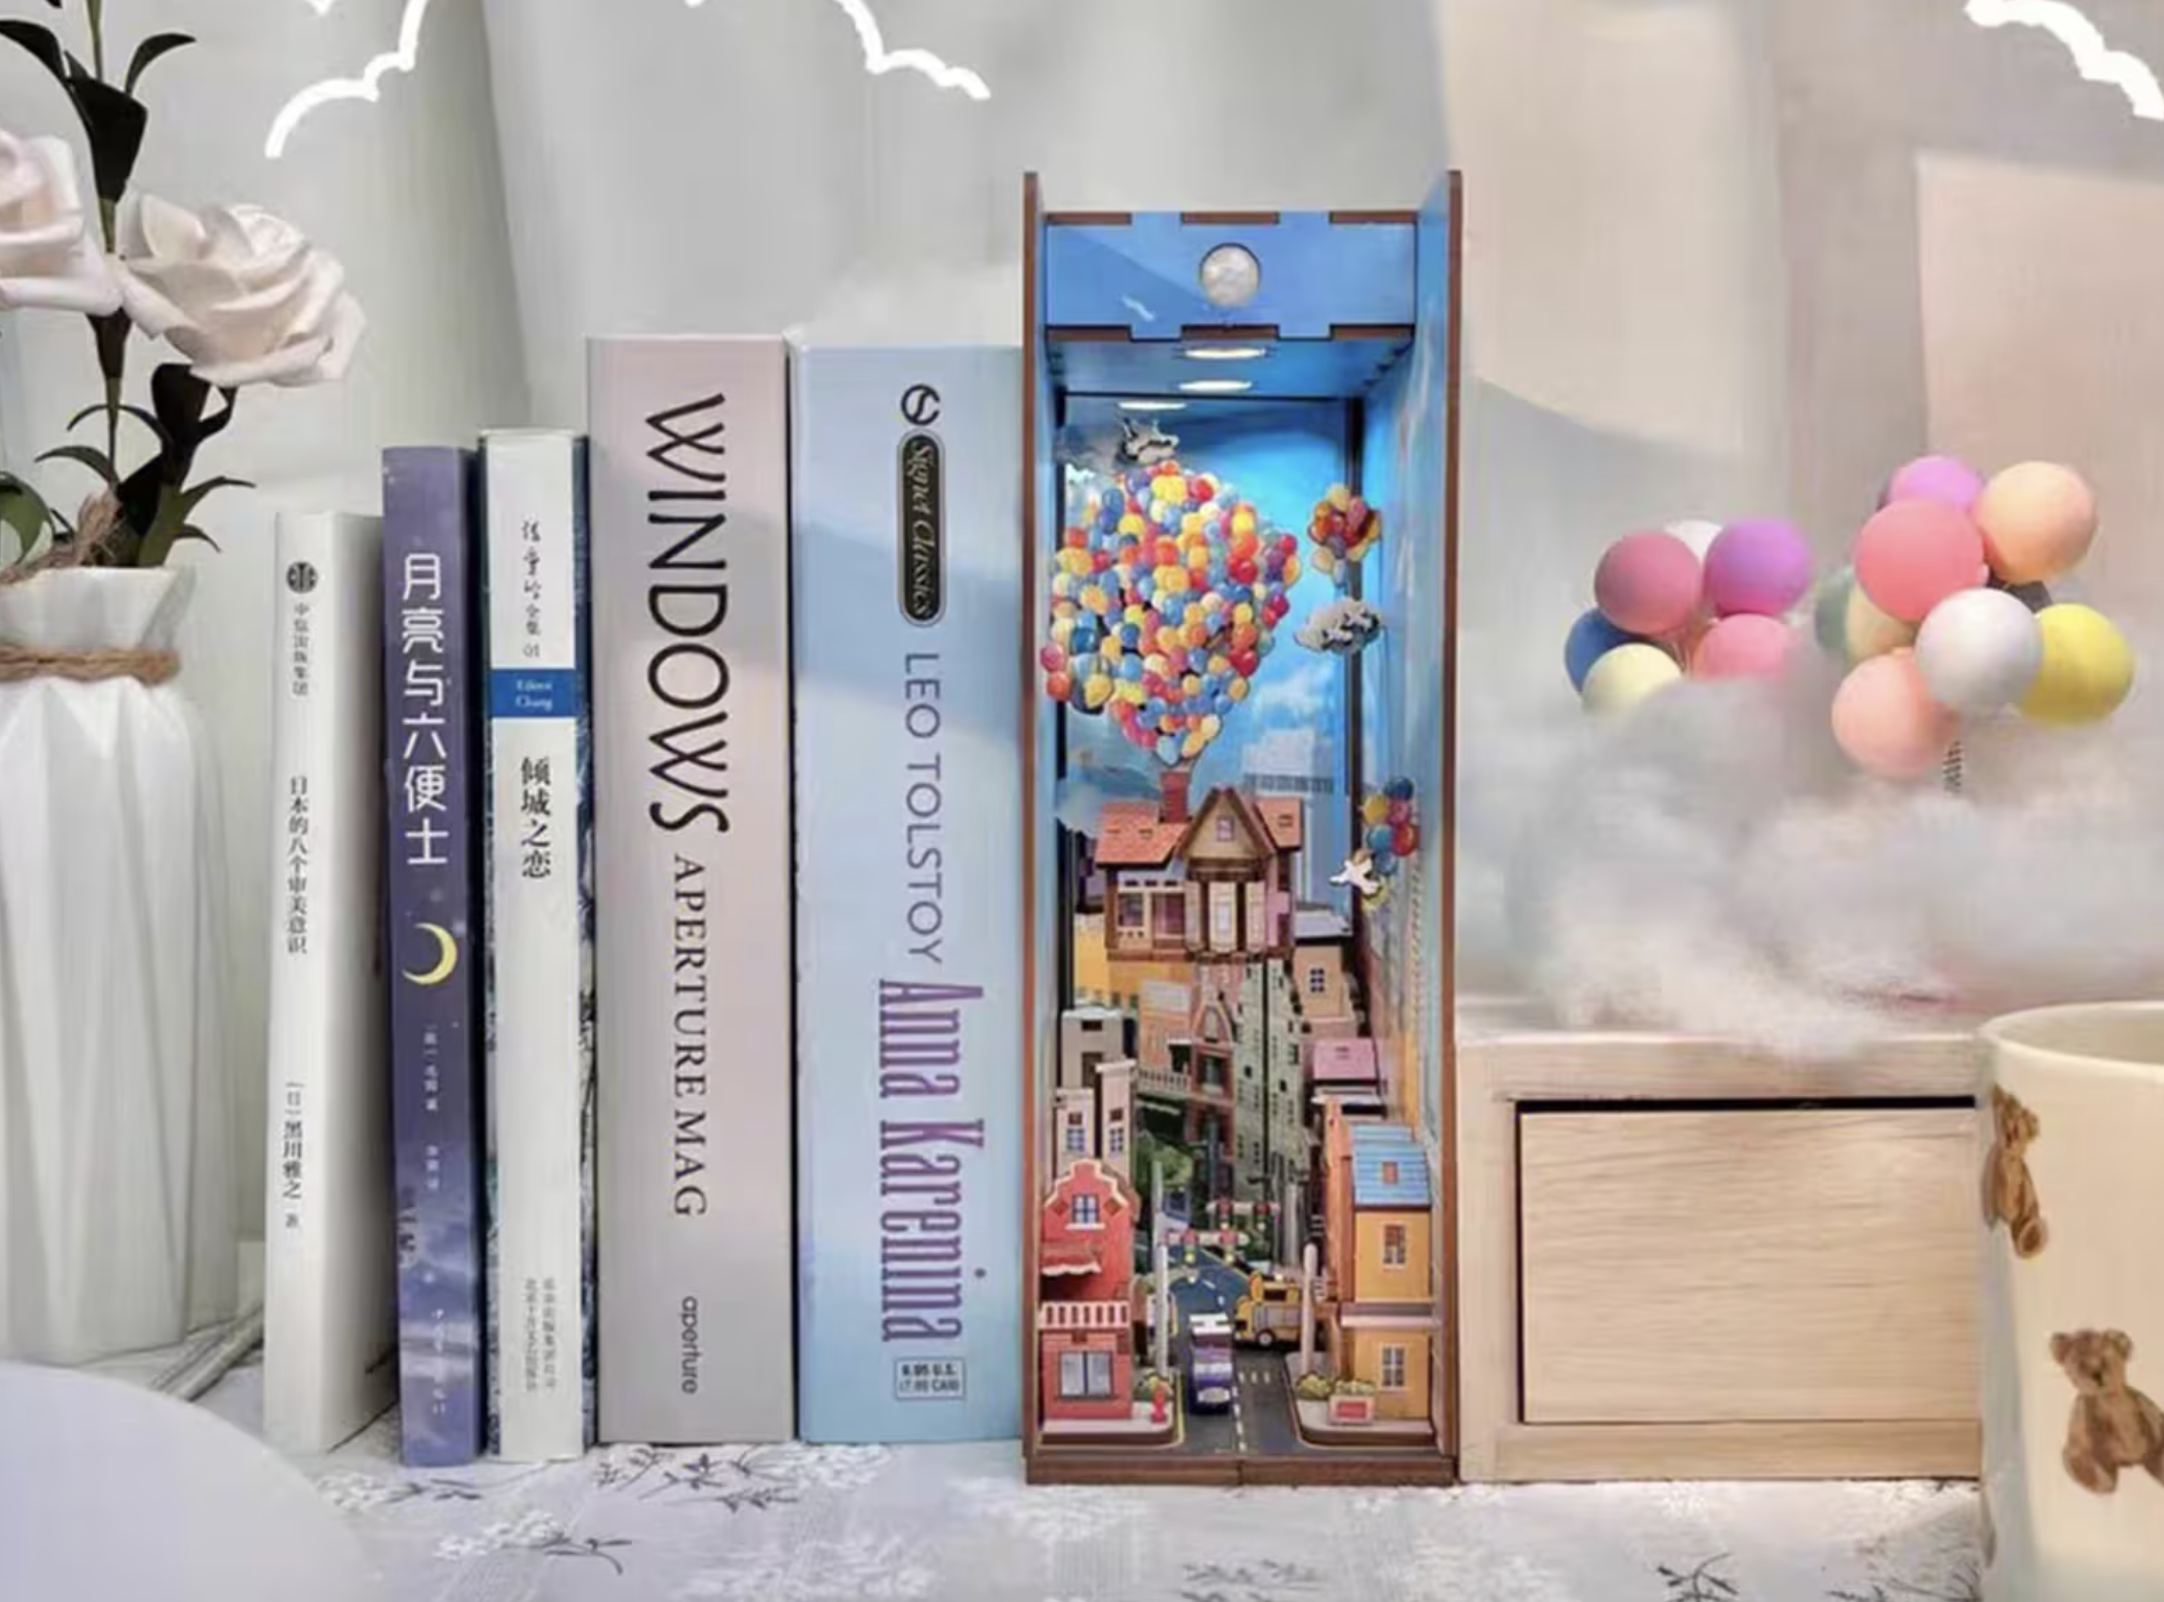 Book Nook Showing a Small Village with Balloons like "UP"